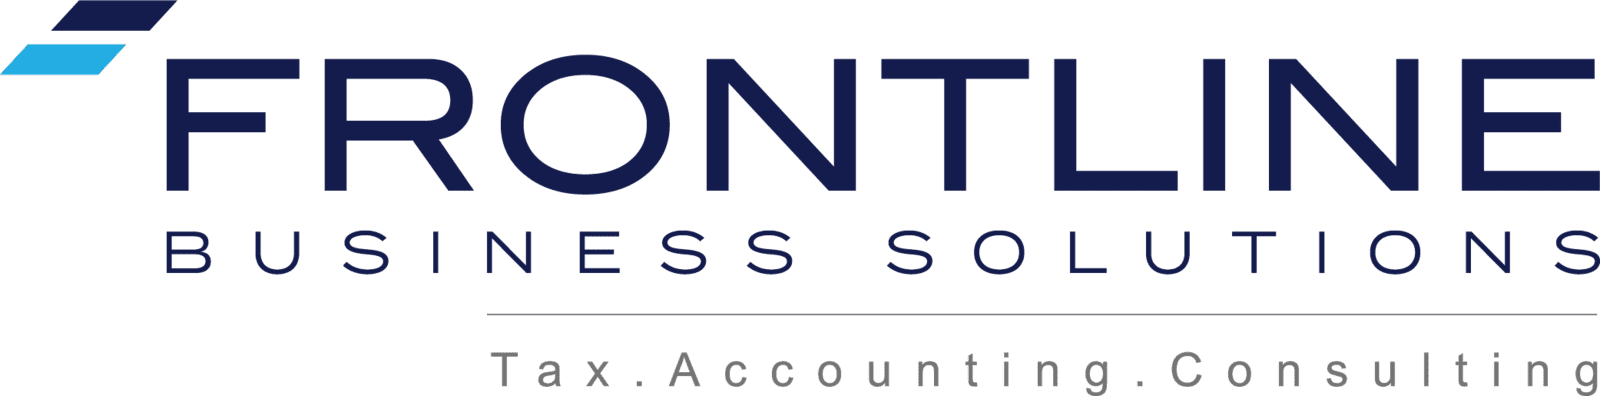 Frontline Business Solutions